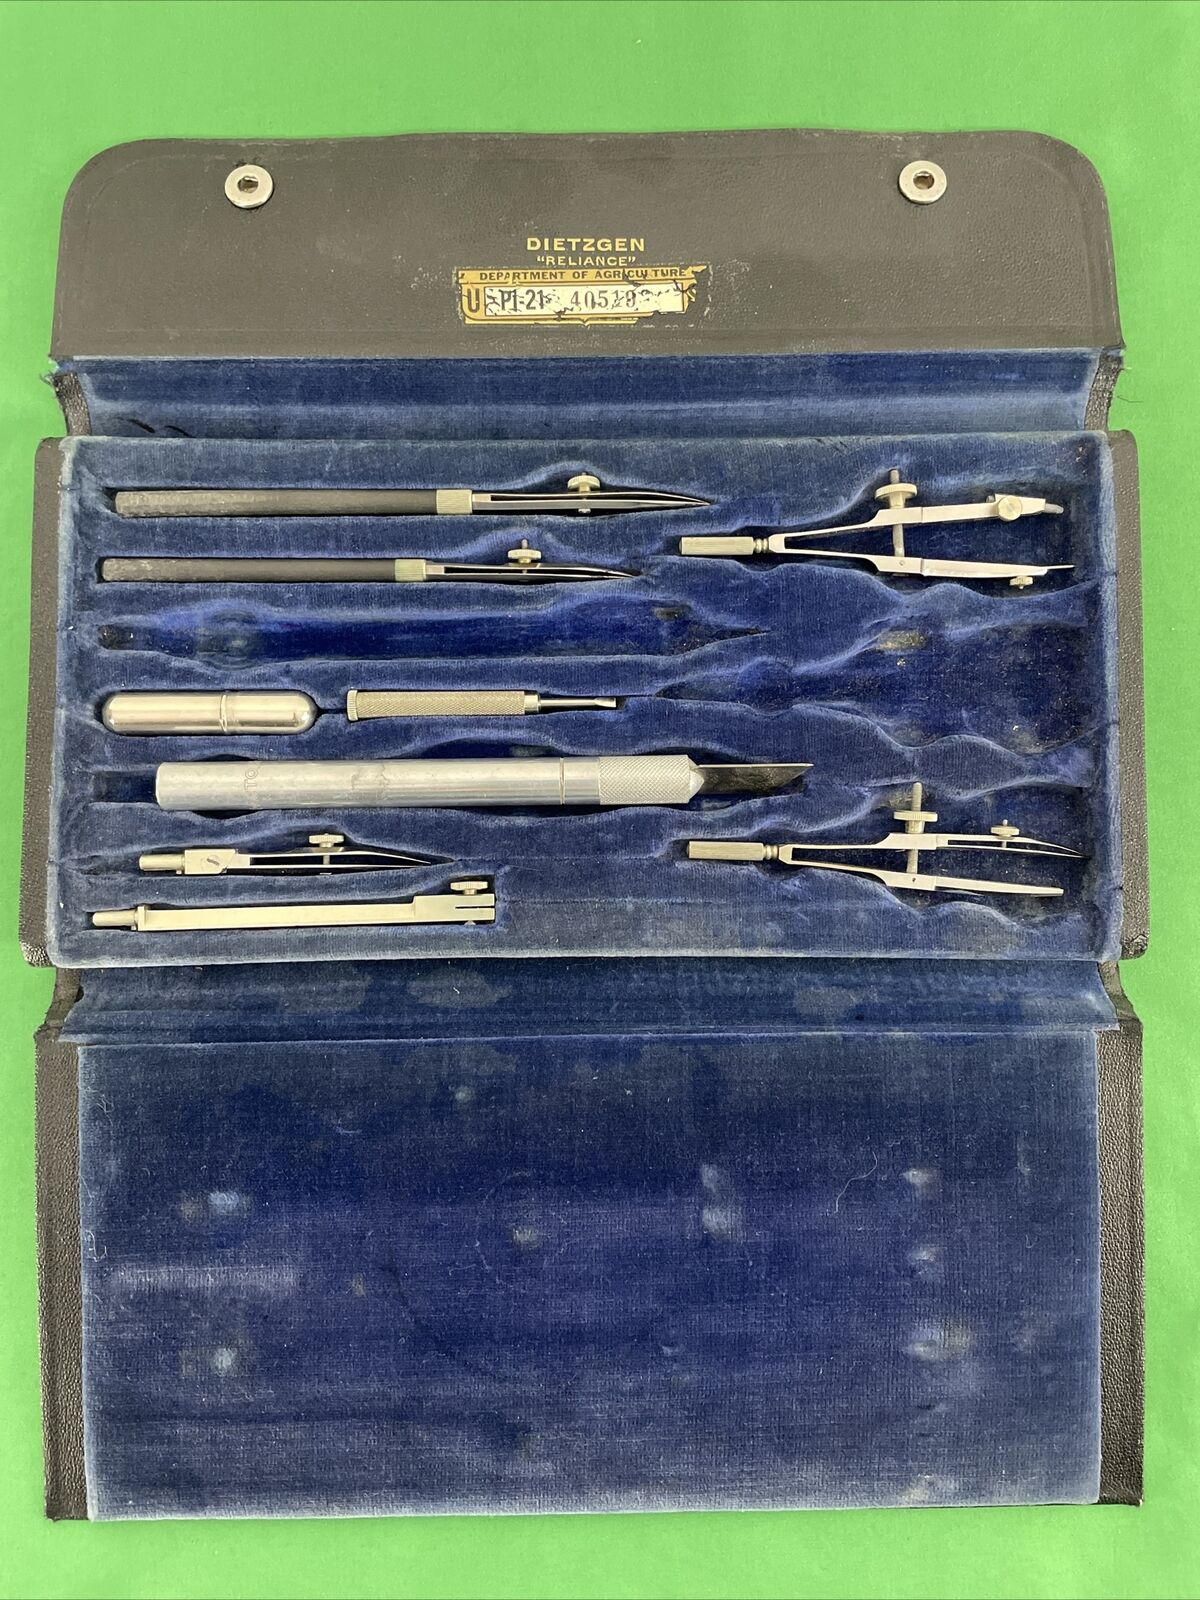 Vintage DIETZGEN 'Reliance' Department of Agriculture Drafting Tool Set w/ Case